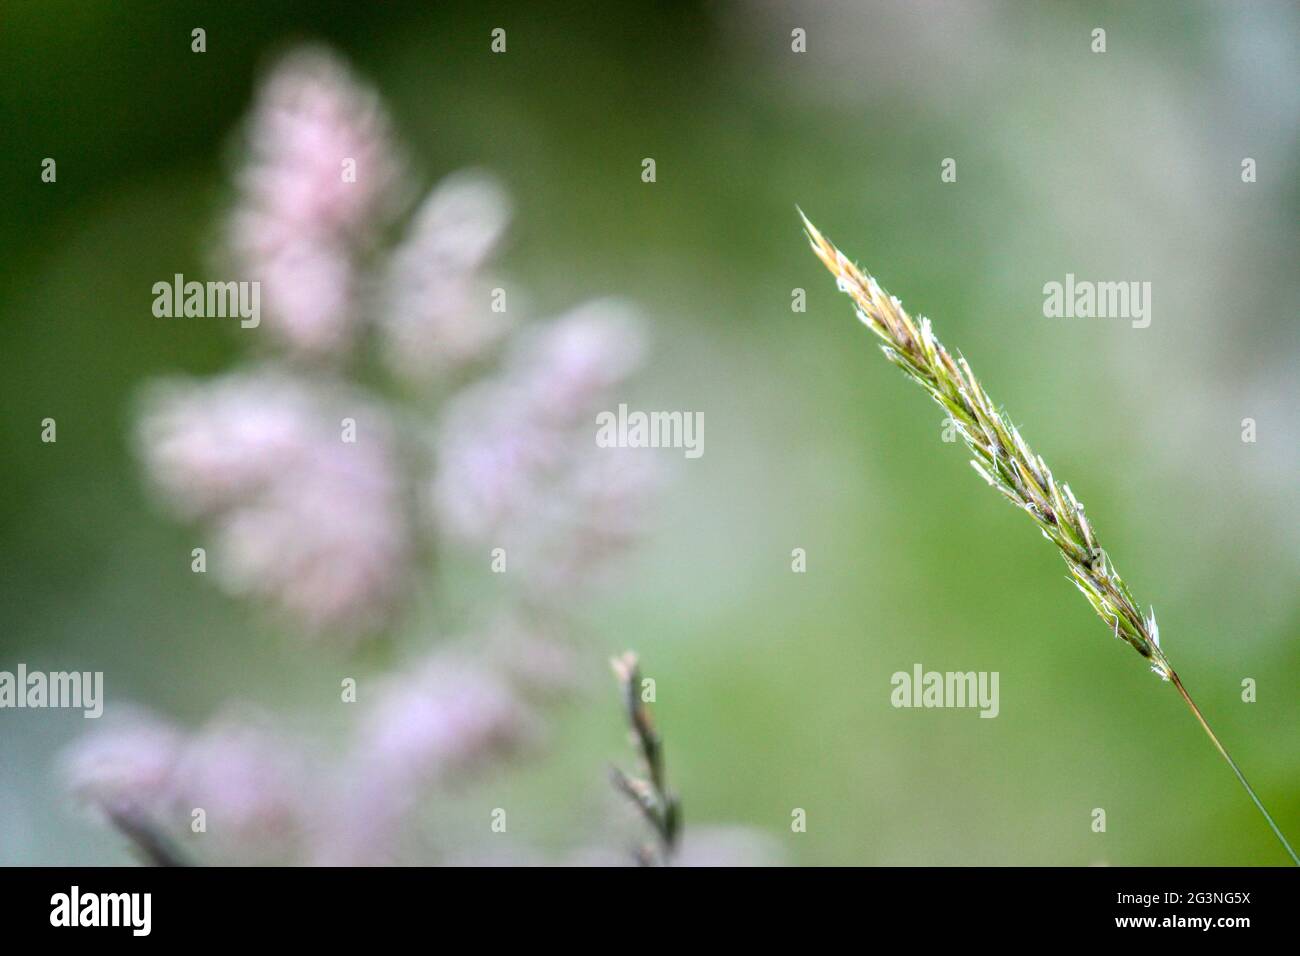 Simple beauty on display with a blade of wheat grass. Stock Photo